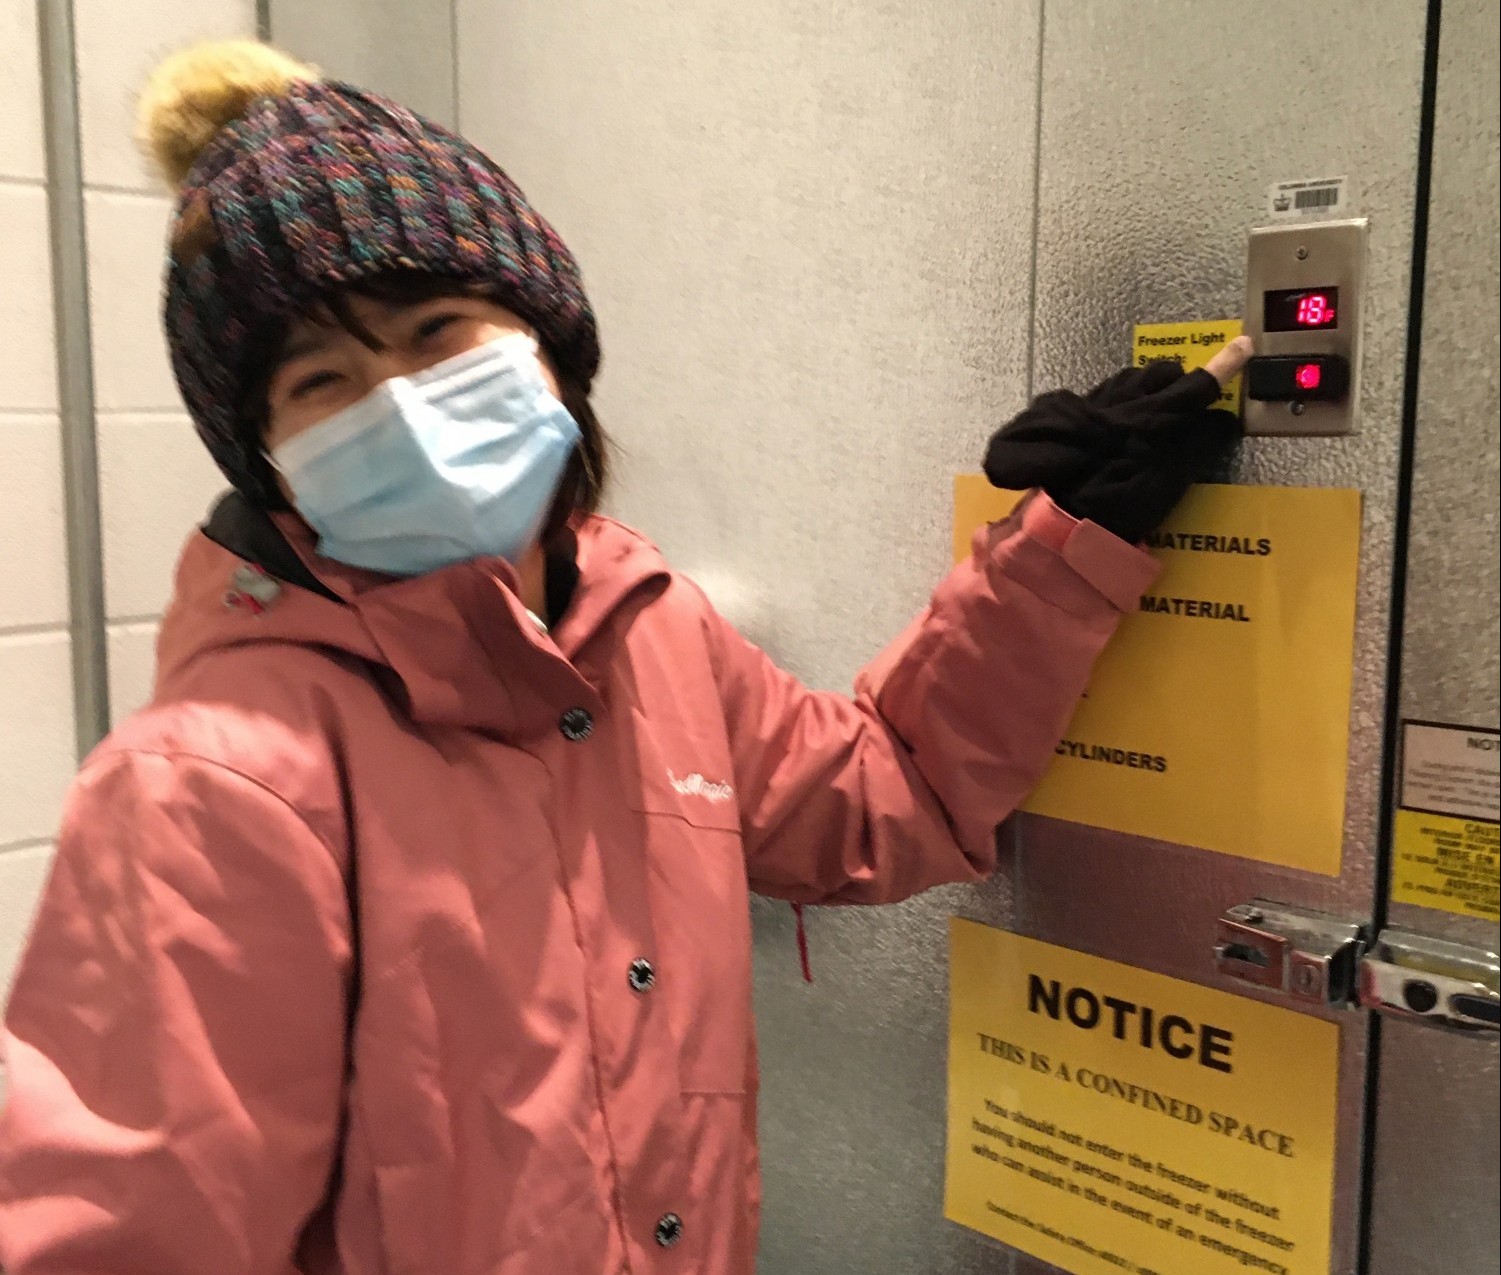 Hatsuki Yamauchi dons warm clothes and gets ready to image ice samples in the cold room (2021).